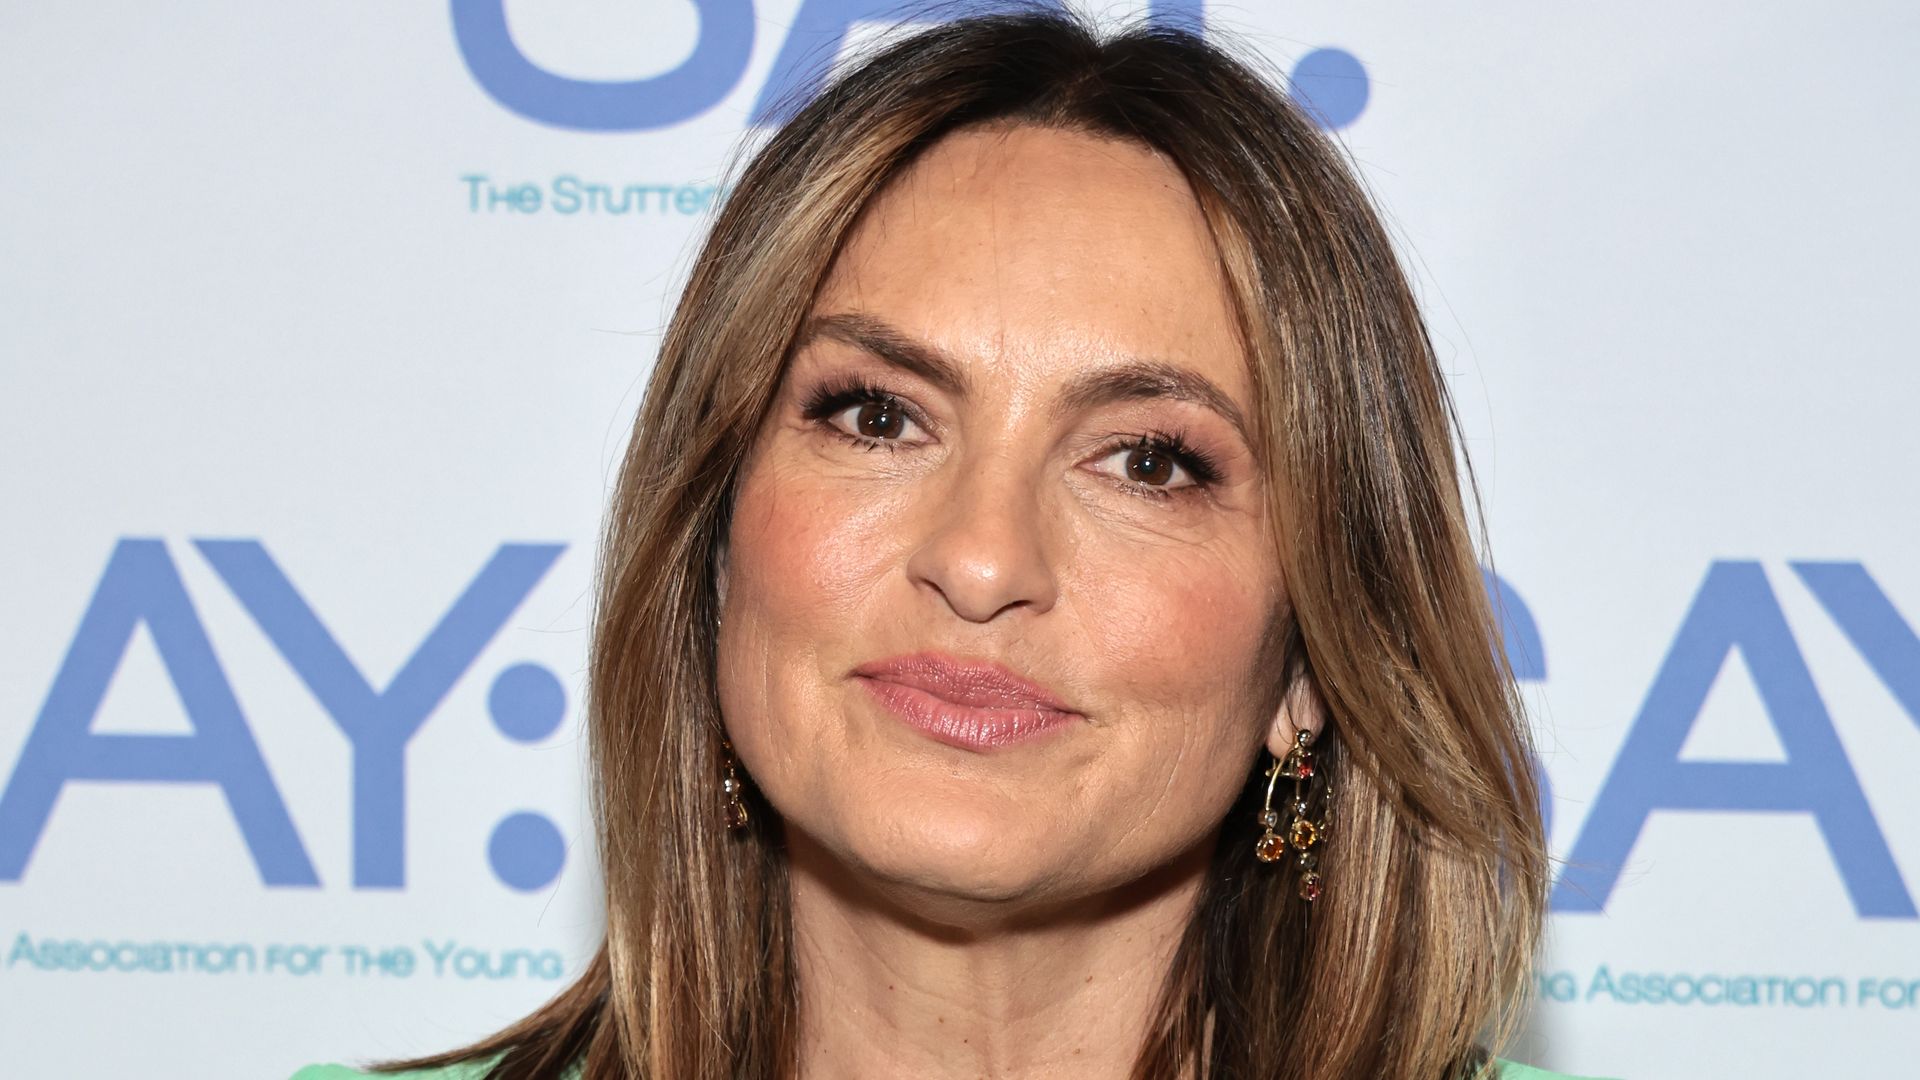 Mariska Hargitay attends the 2023 Stuttering Association For The Young (SAY) Benefit Gala at The Edison Ballroom on May 22, 2023 in New York City